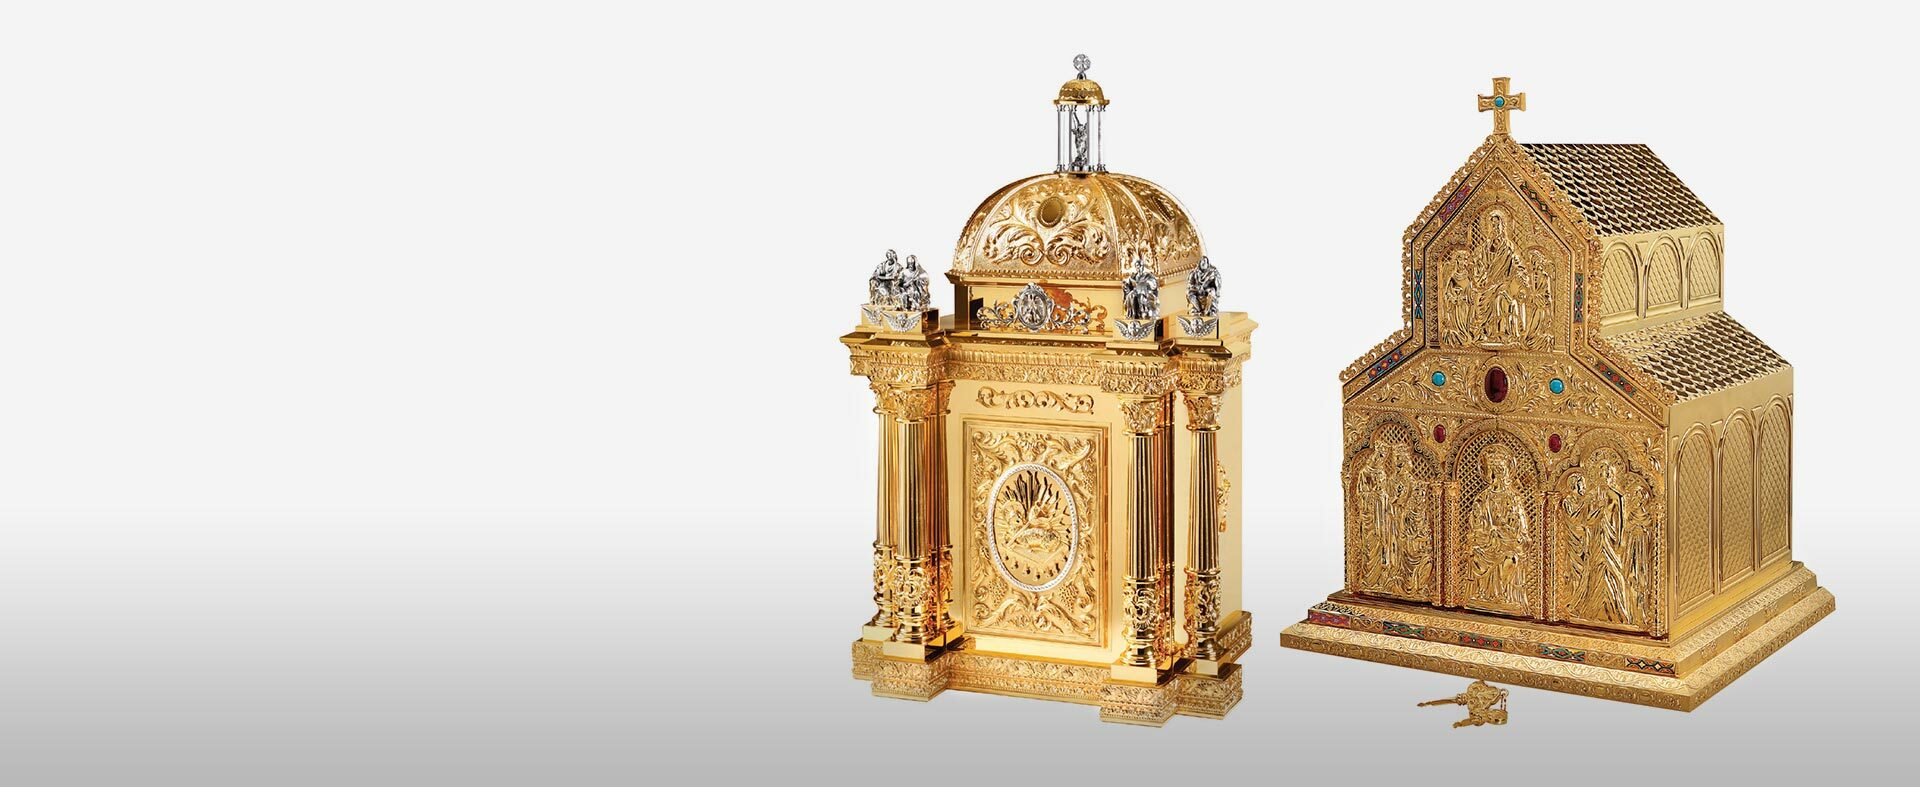 The Most Expensive Thing in the World - Catholic Stand